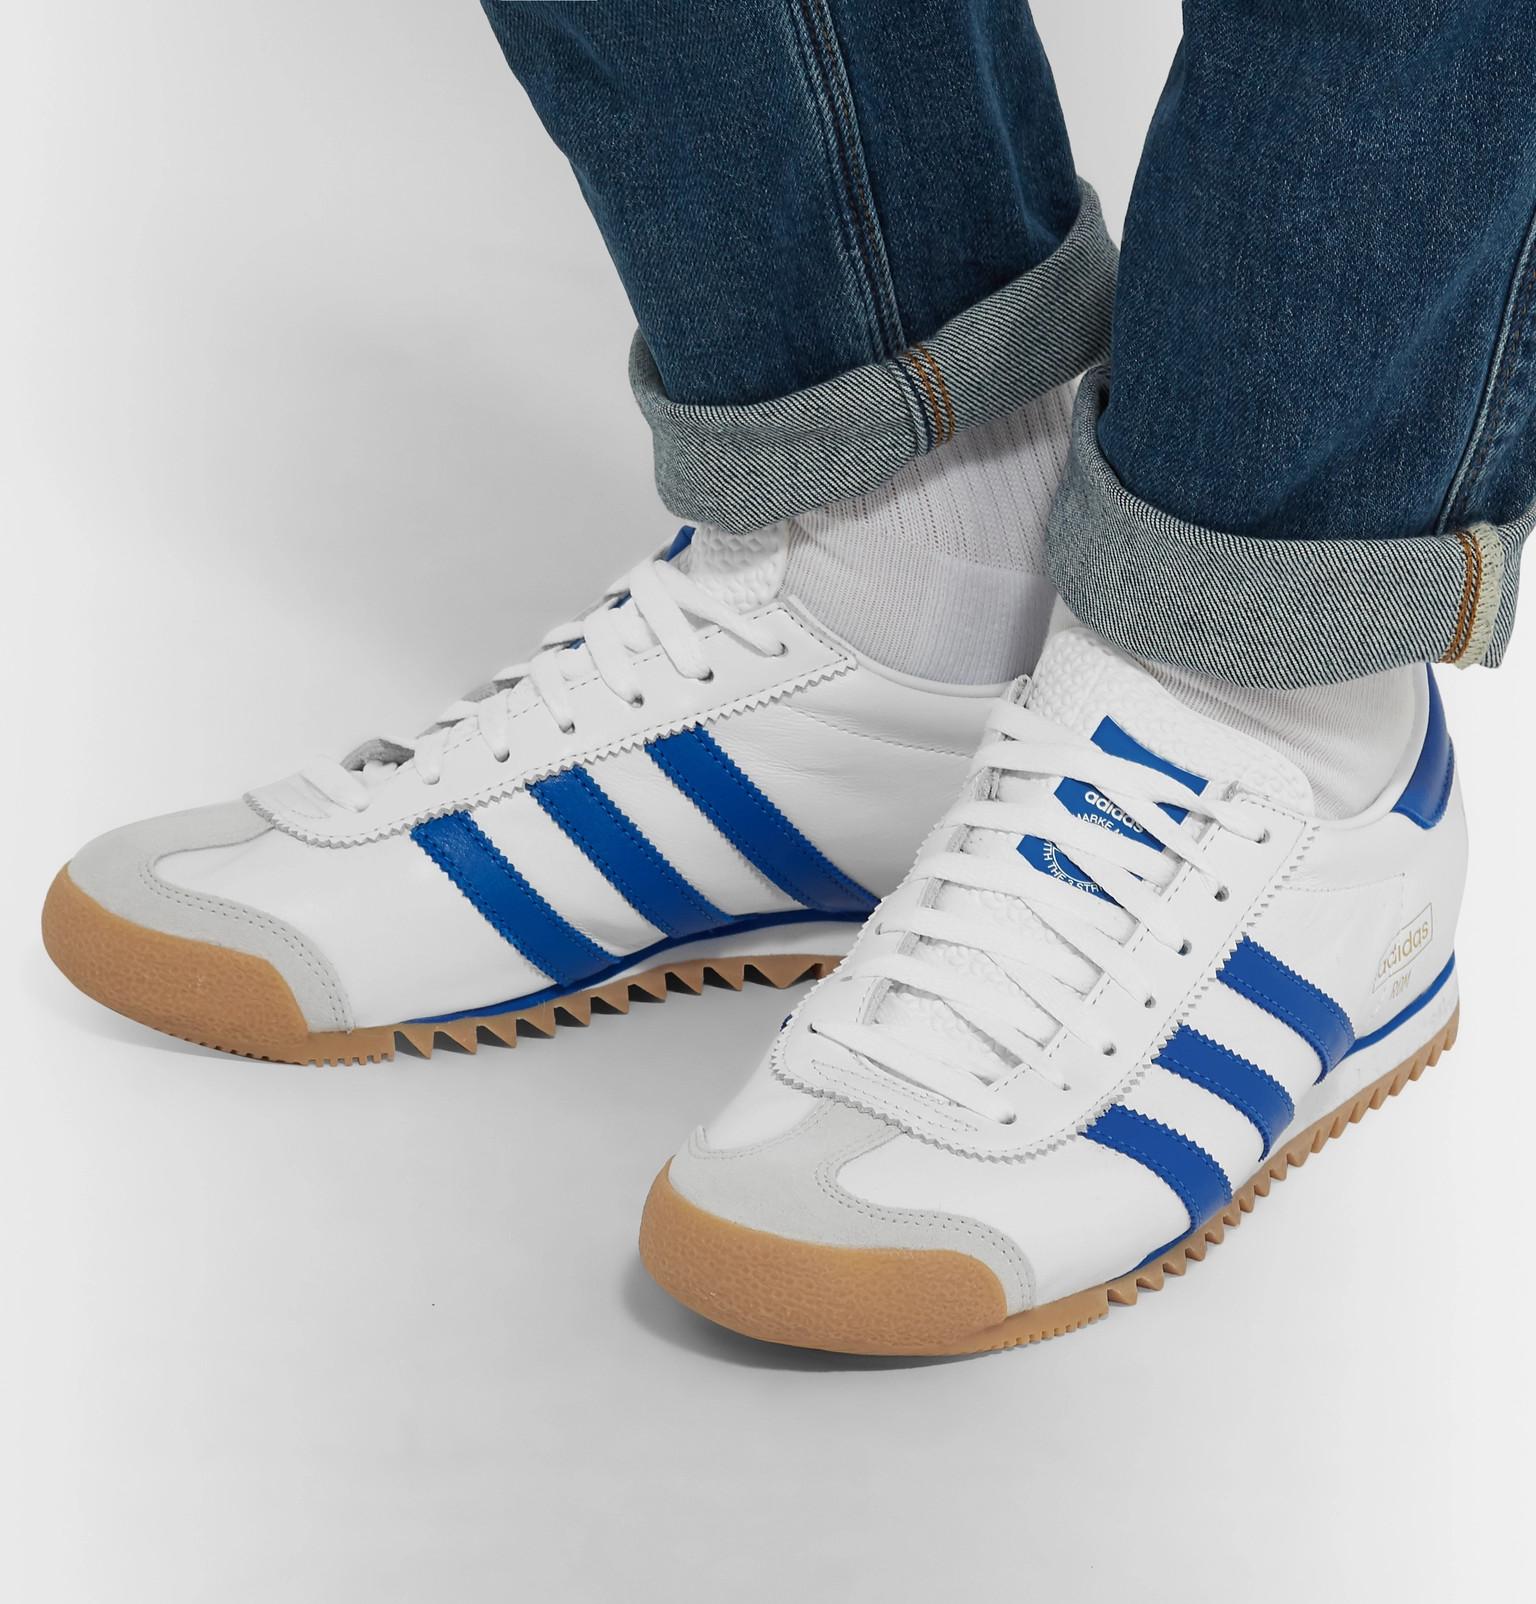 adidas Originals Rom City Series Suede-trimmed Leather Sneakers in White  for Men - Lyst